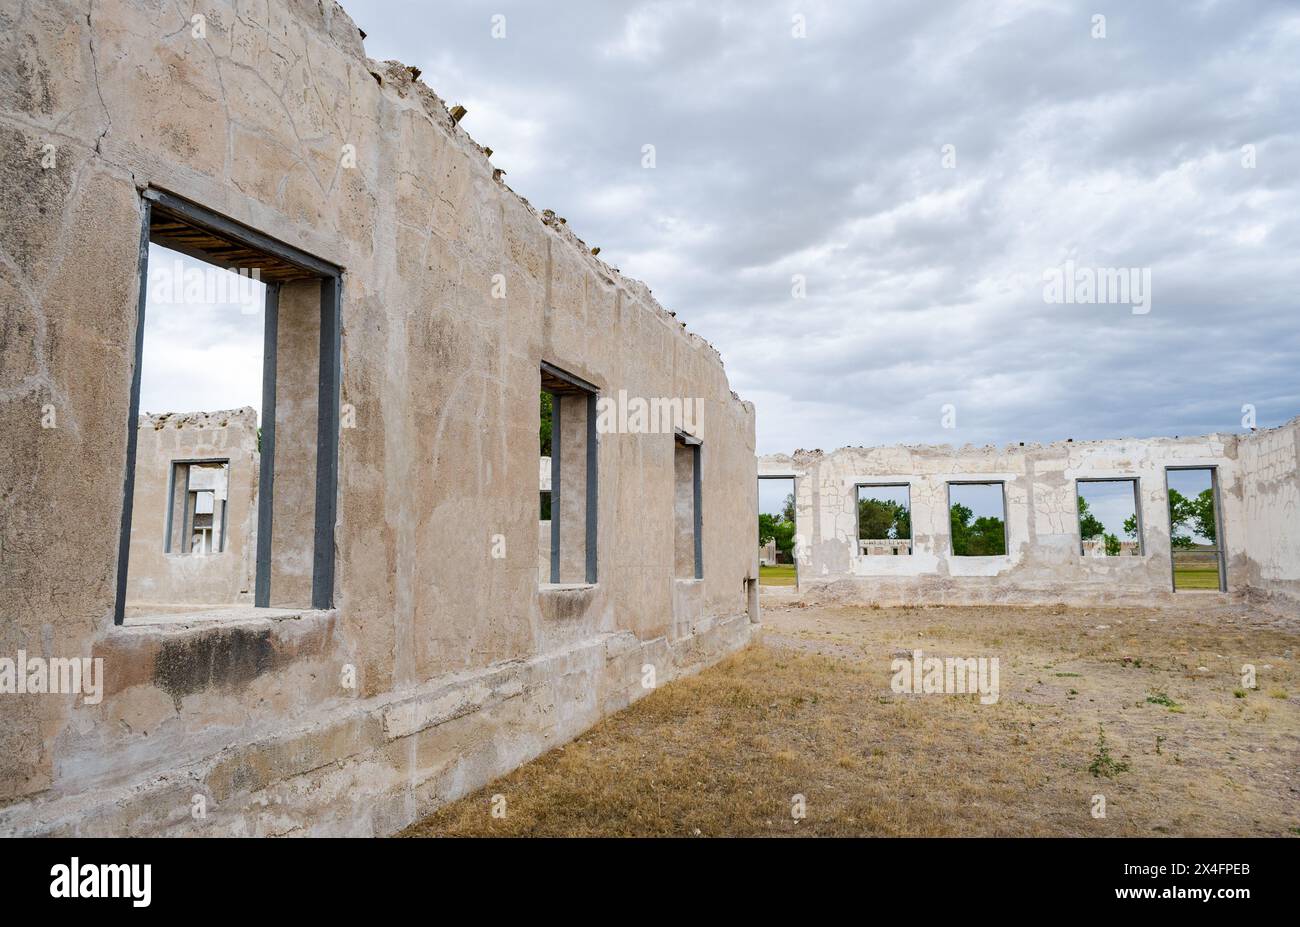 Fort Laramie National Historic Site, Trading Post, Diplomatic Site, and Military Installation in Wyoming, USA Stock Photo